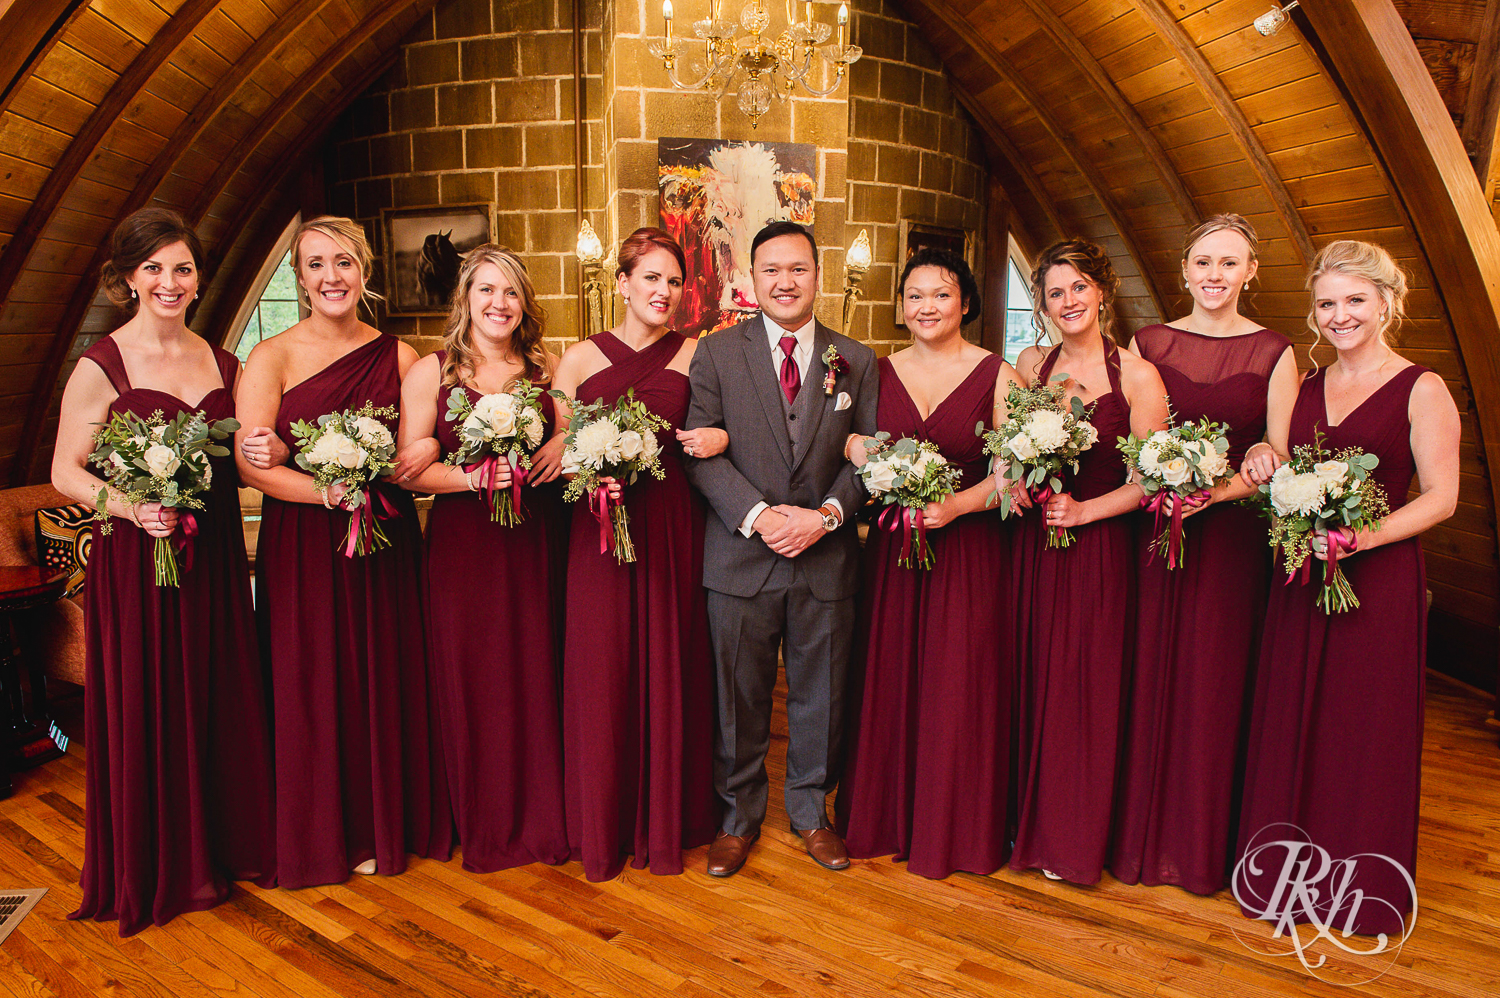 Groom smiles with wedding party at Green Acres Event Center barn wedding in Eden Prairie, Minnesota.